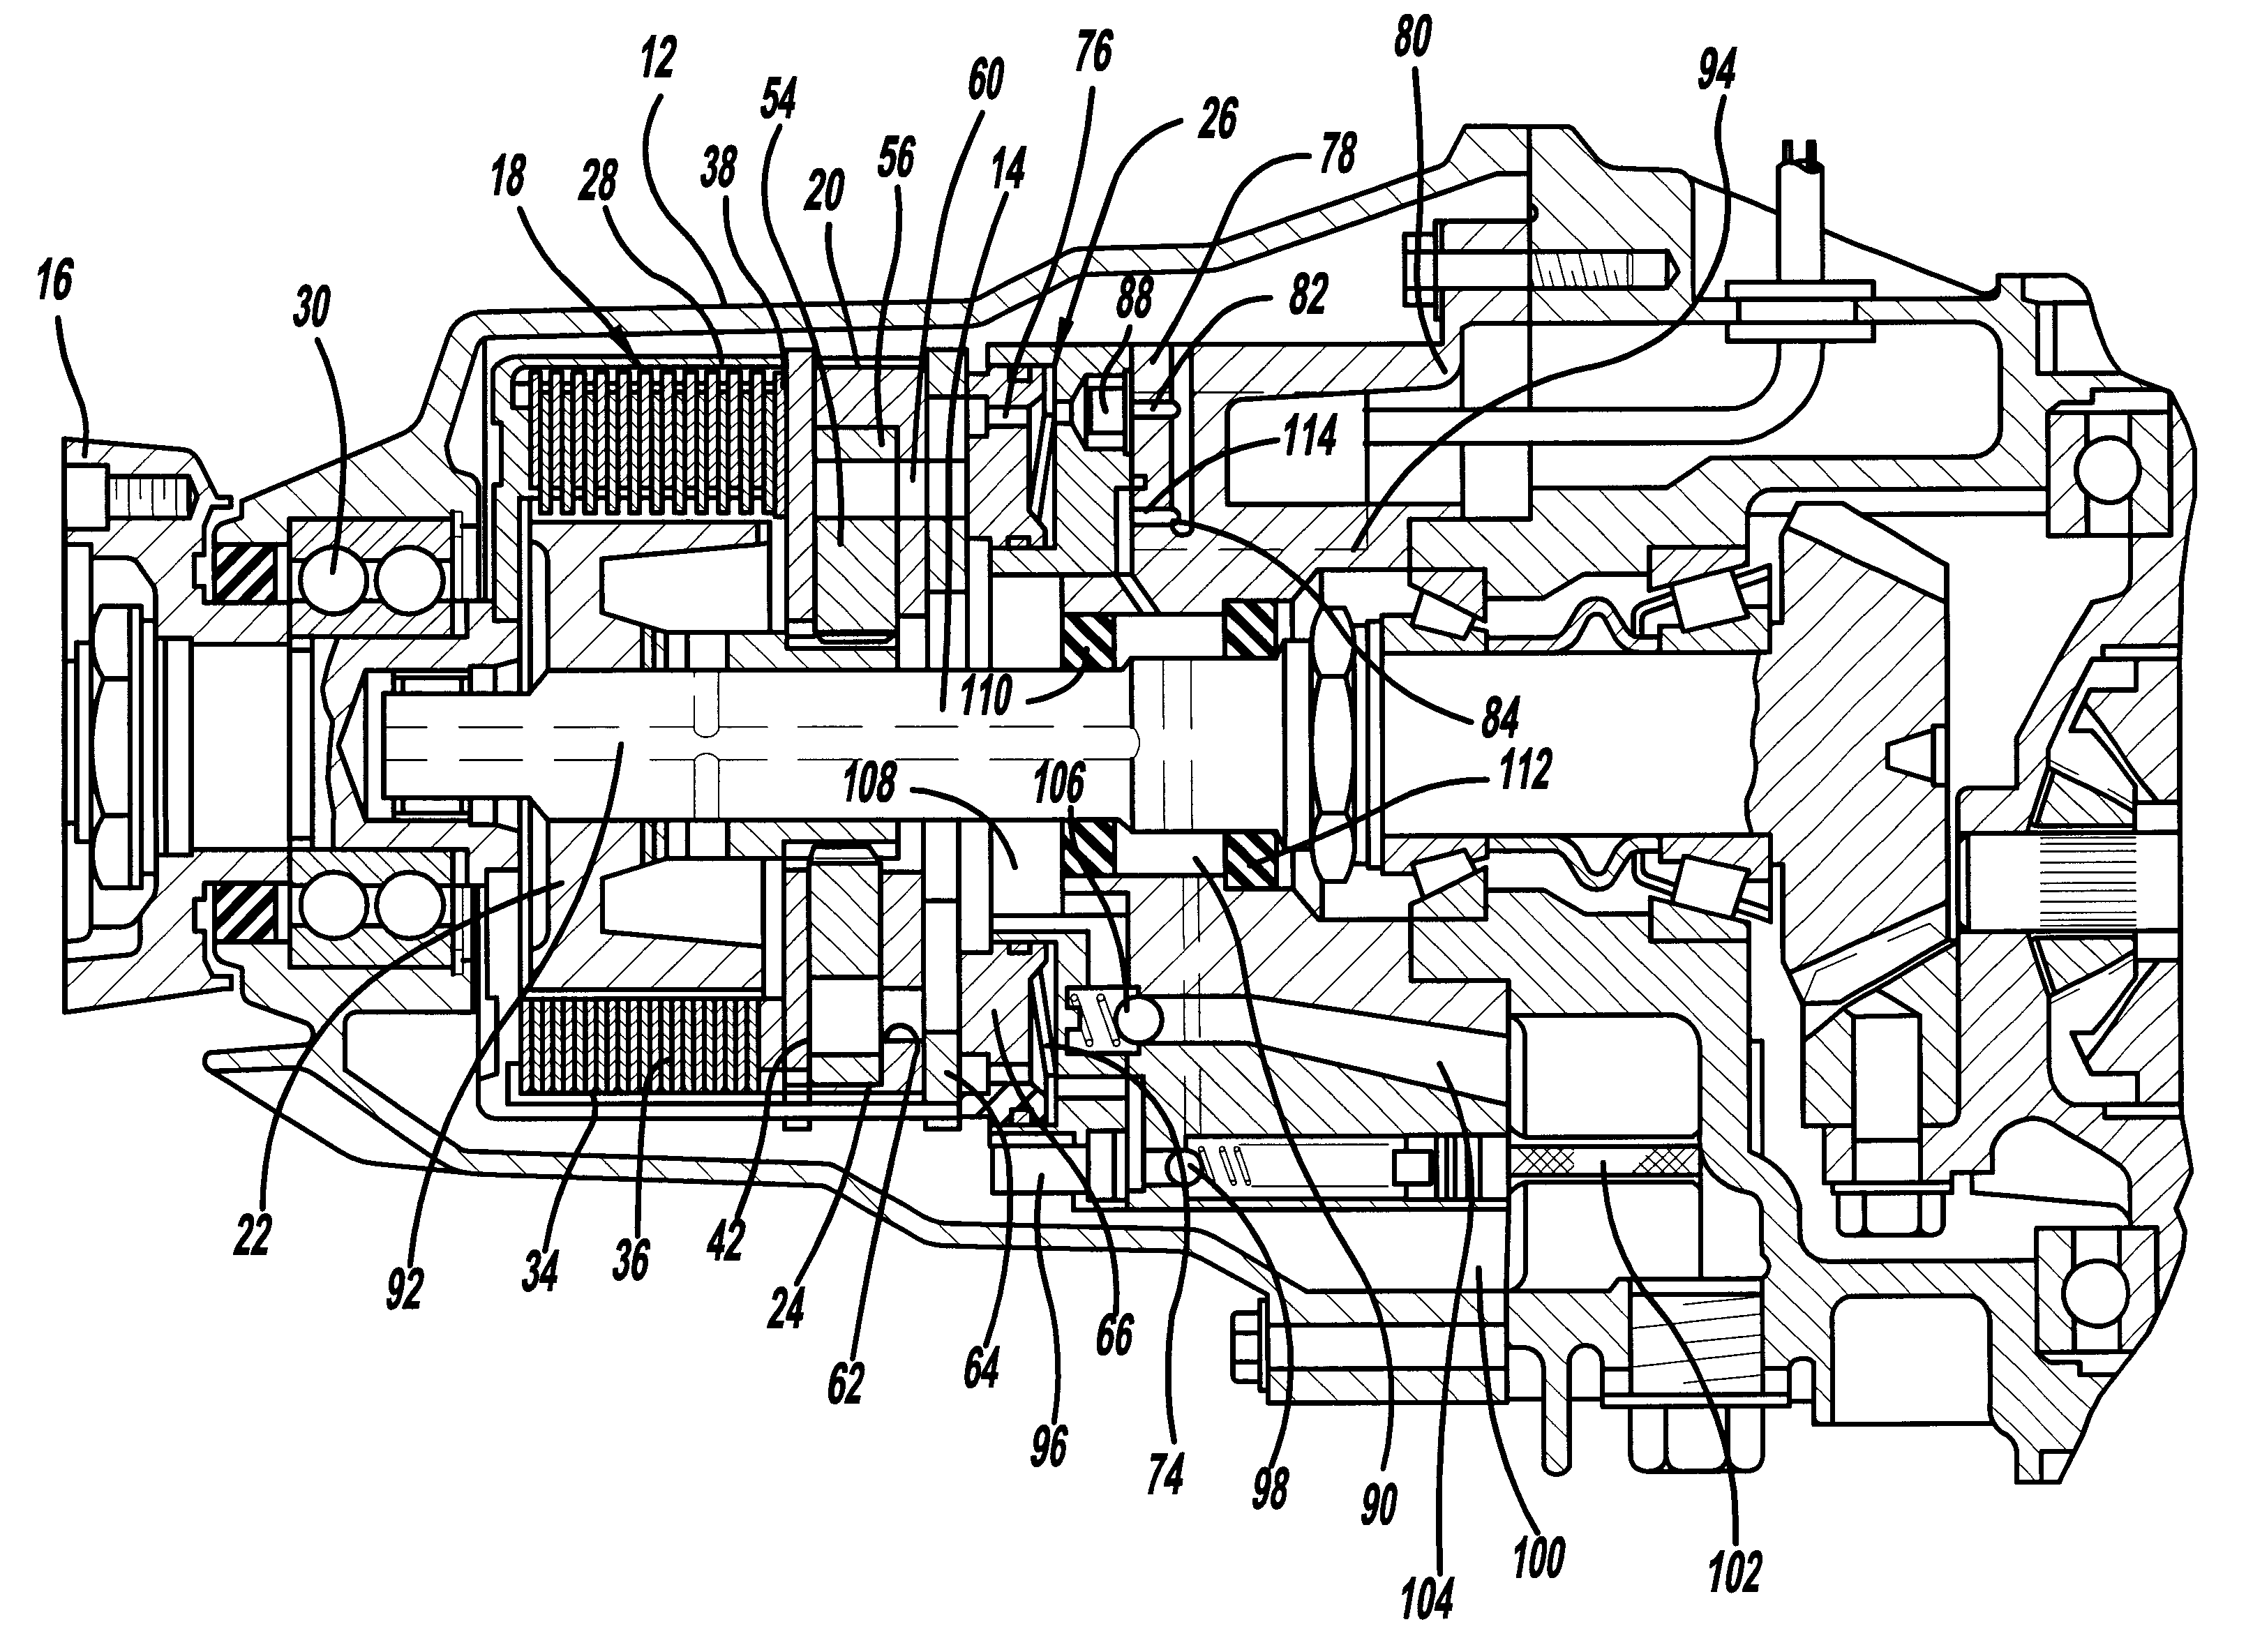 Externally controlled hydraulic torque transfer device